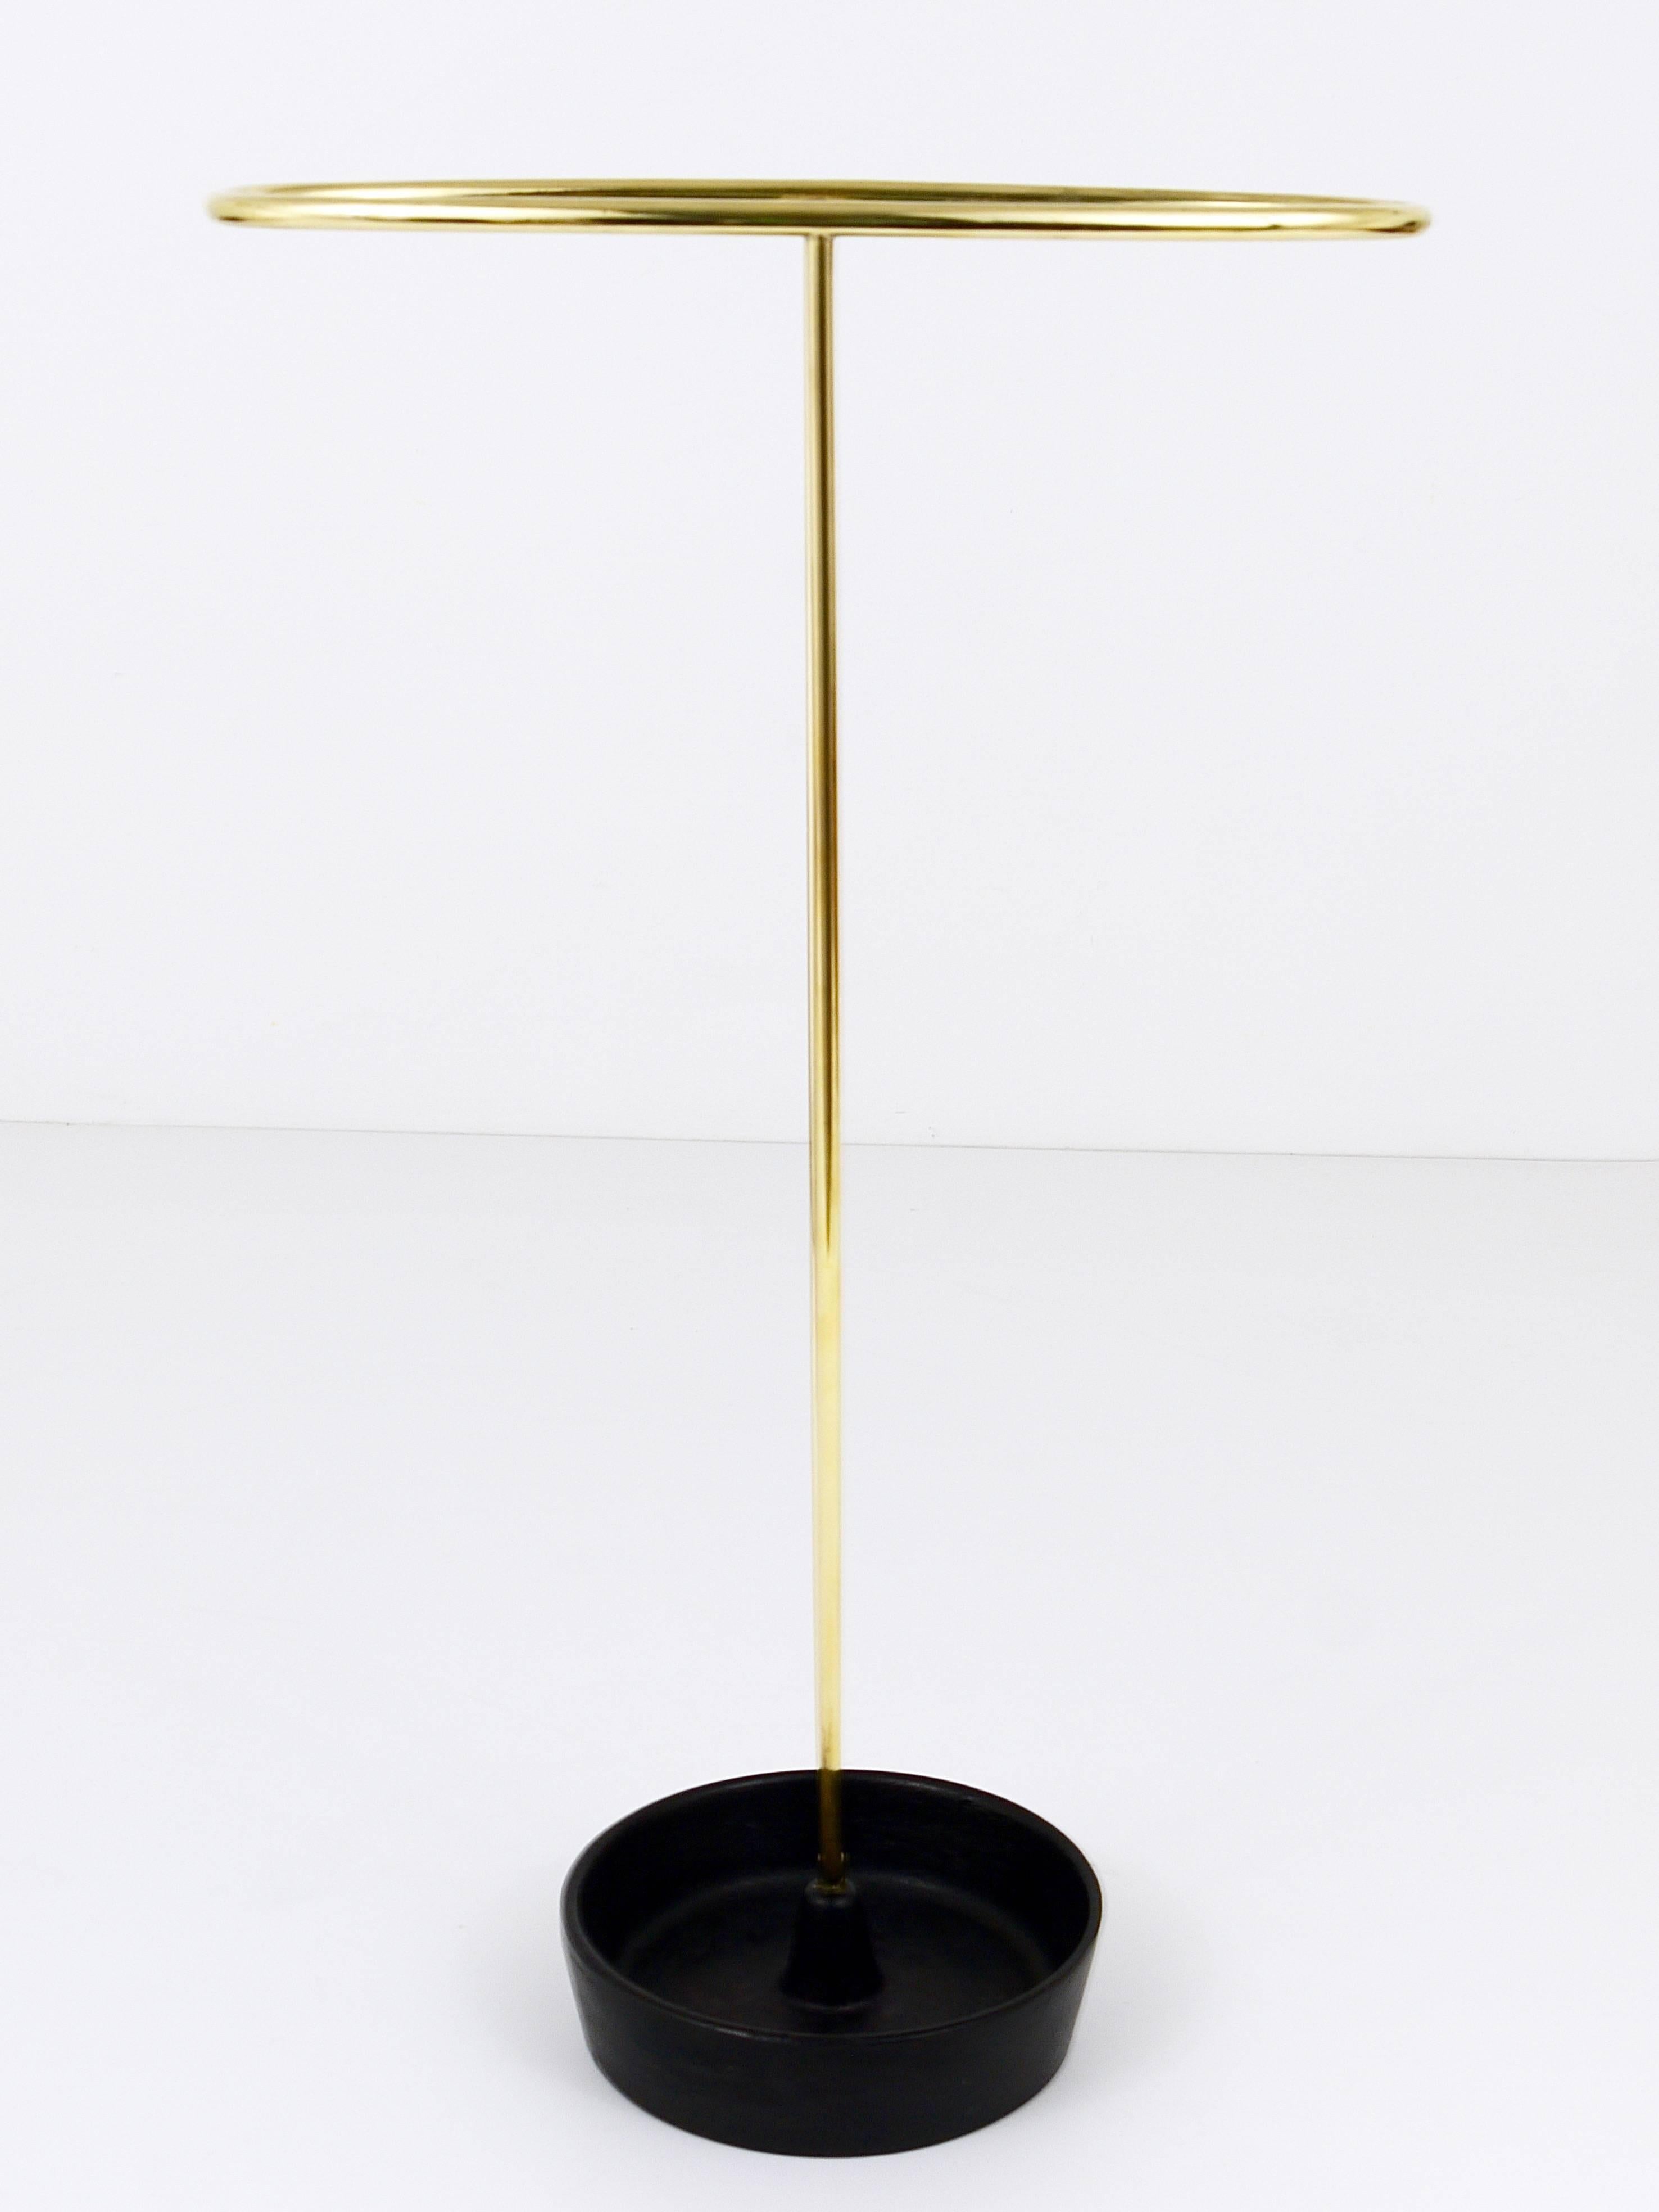 This beautiful modernist umbrella stand hails from the 1950s, crafted with brass and featuring a base of cast iron. Designed by Franz Hagenauer and executed at the Werkstätte Hagenauer Workshop in Vienna, Austria. This piece embodies a blend of